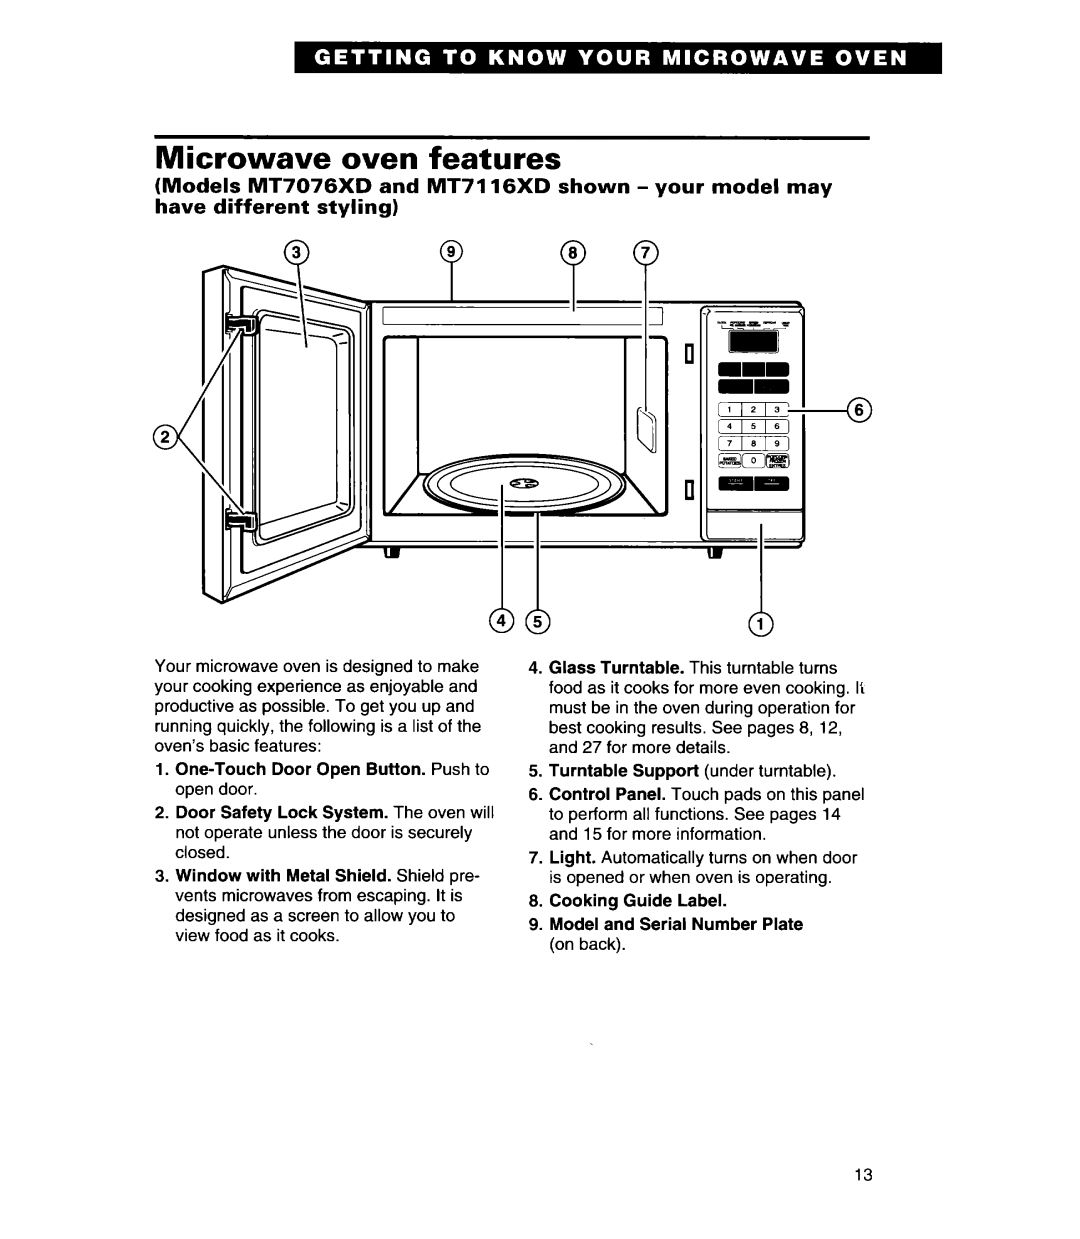 Whirlpool MT7118XD, MT7078XD, MT7116XD installation instructions Microwave oven features, have different styling 